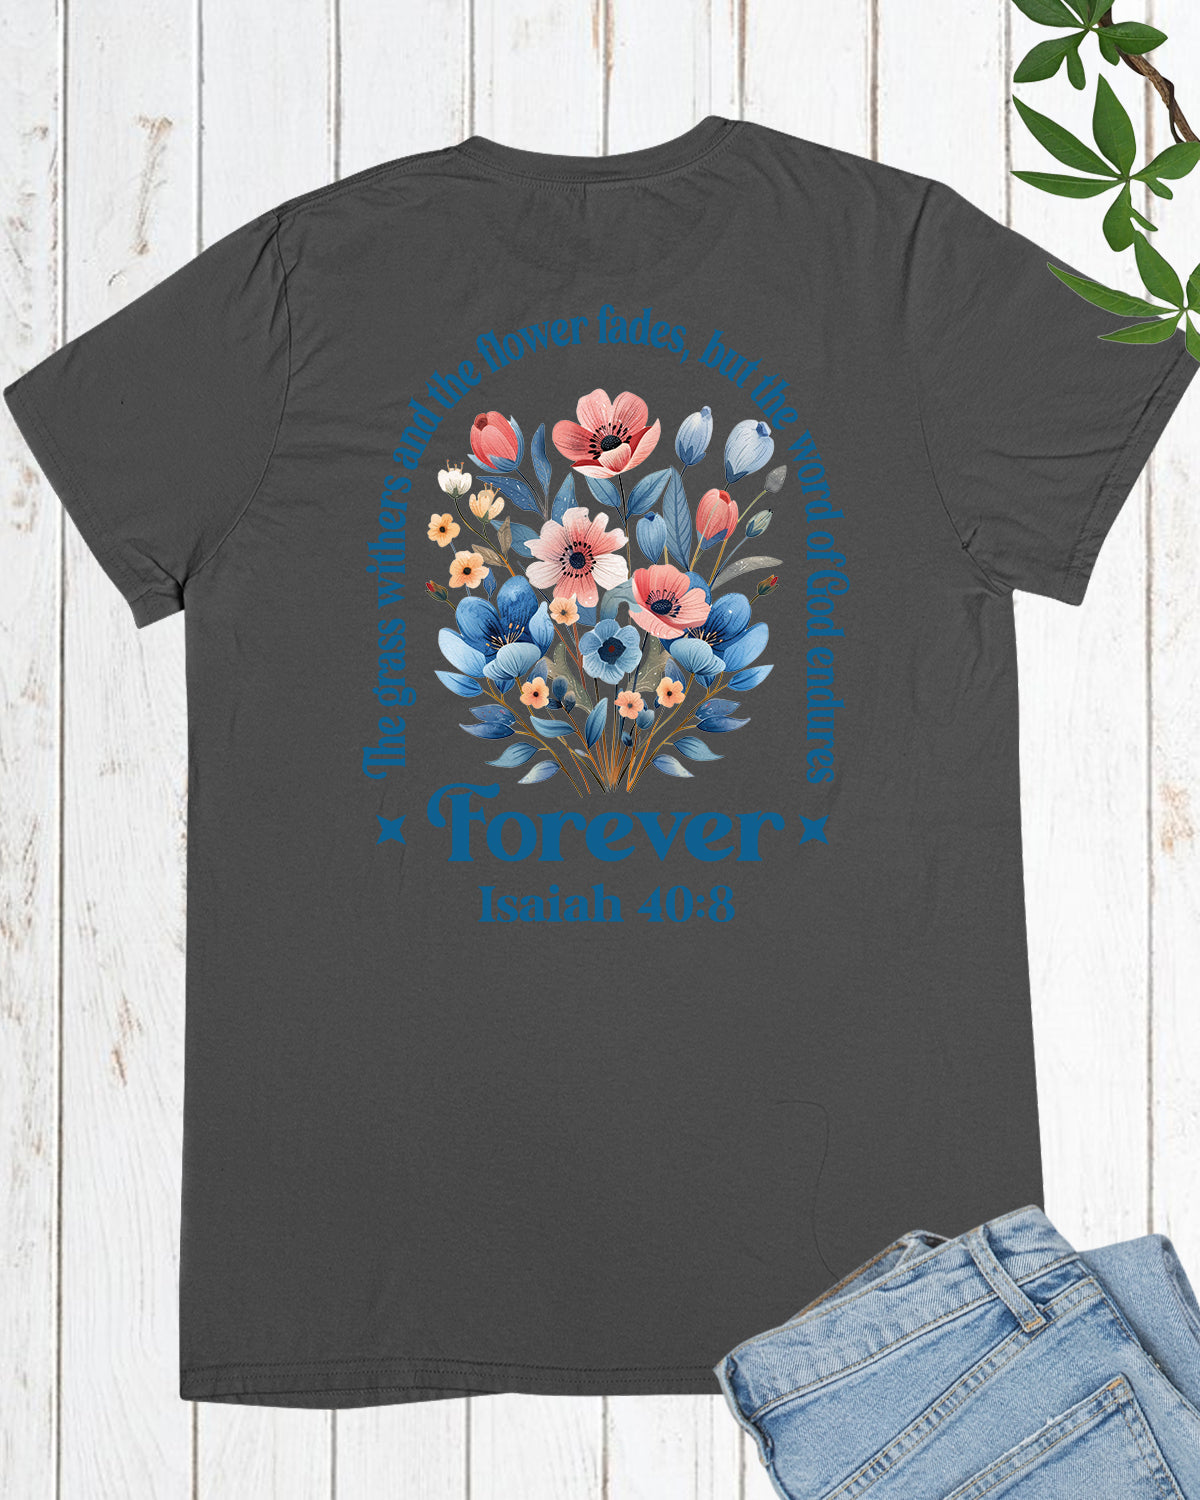 The Grass Withers and The Flower Fades, But The Word of God Endures Forever Christian Shirts